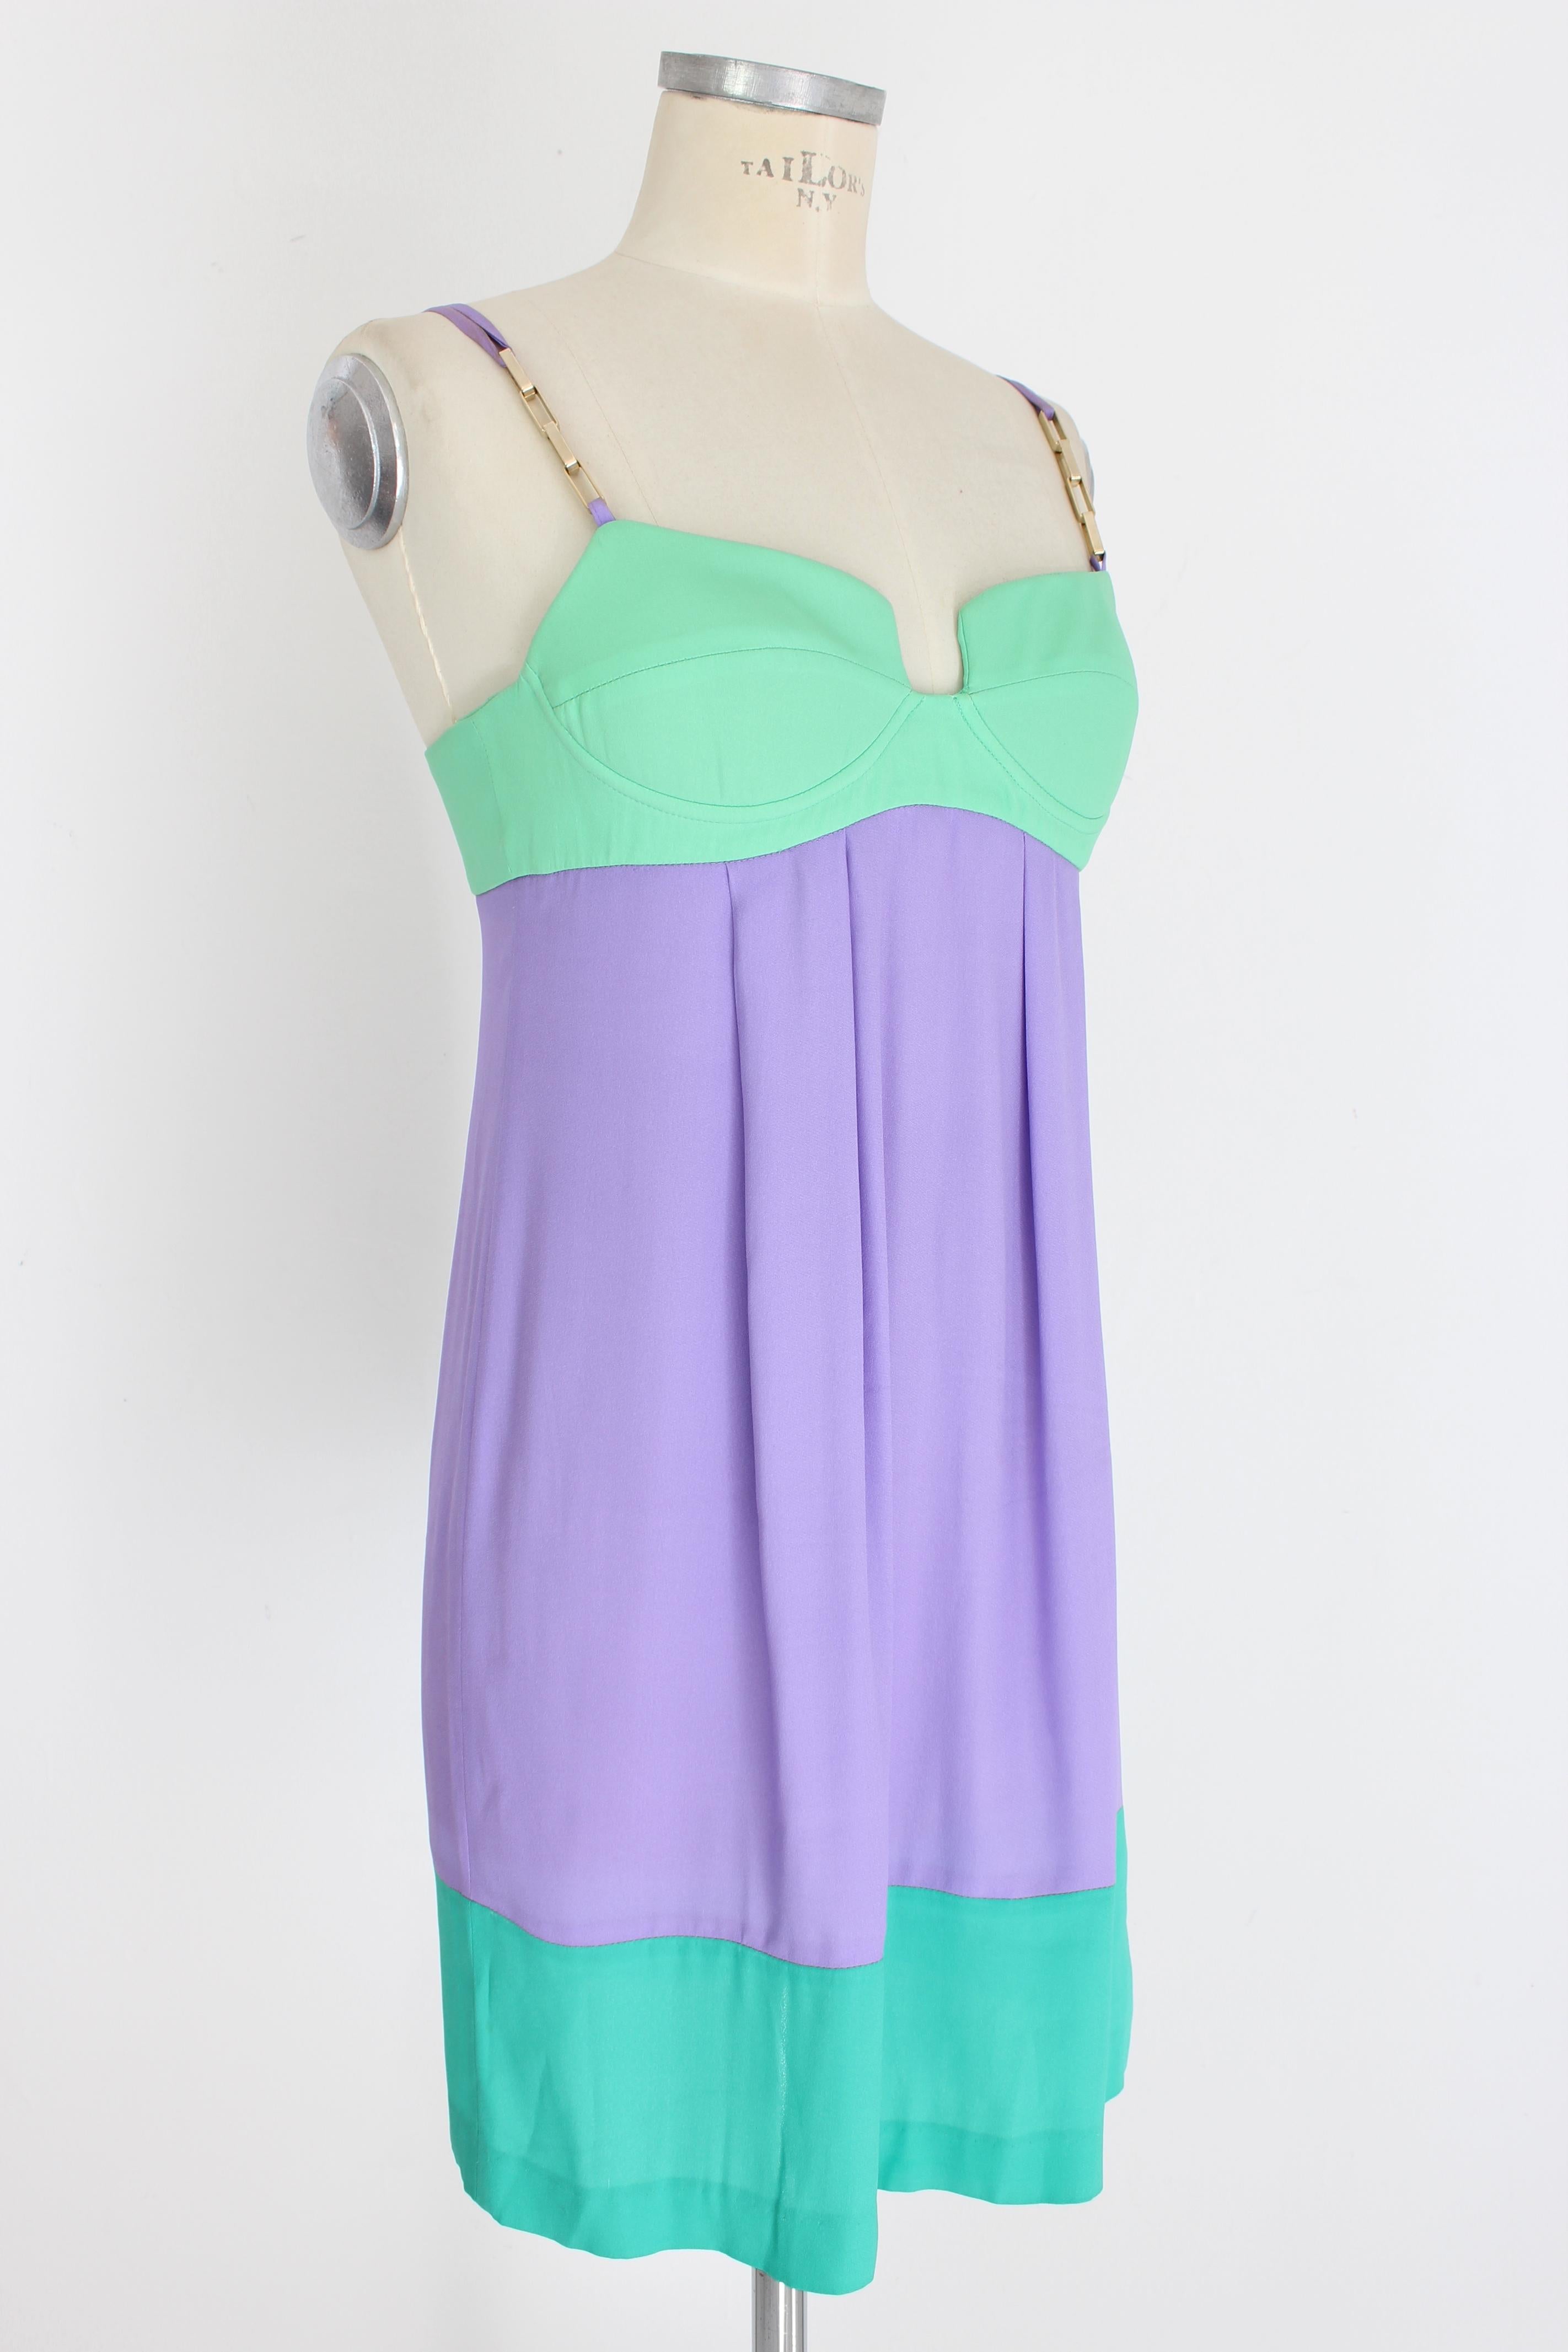 Roberto Cavalli Purple Green Evening Sheath Dress In Excellent Condition For Sale In Brindisi, Bt